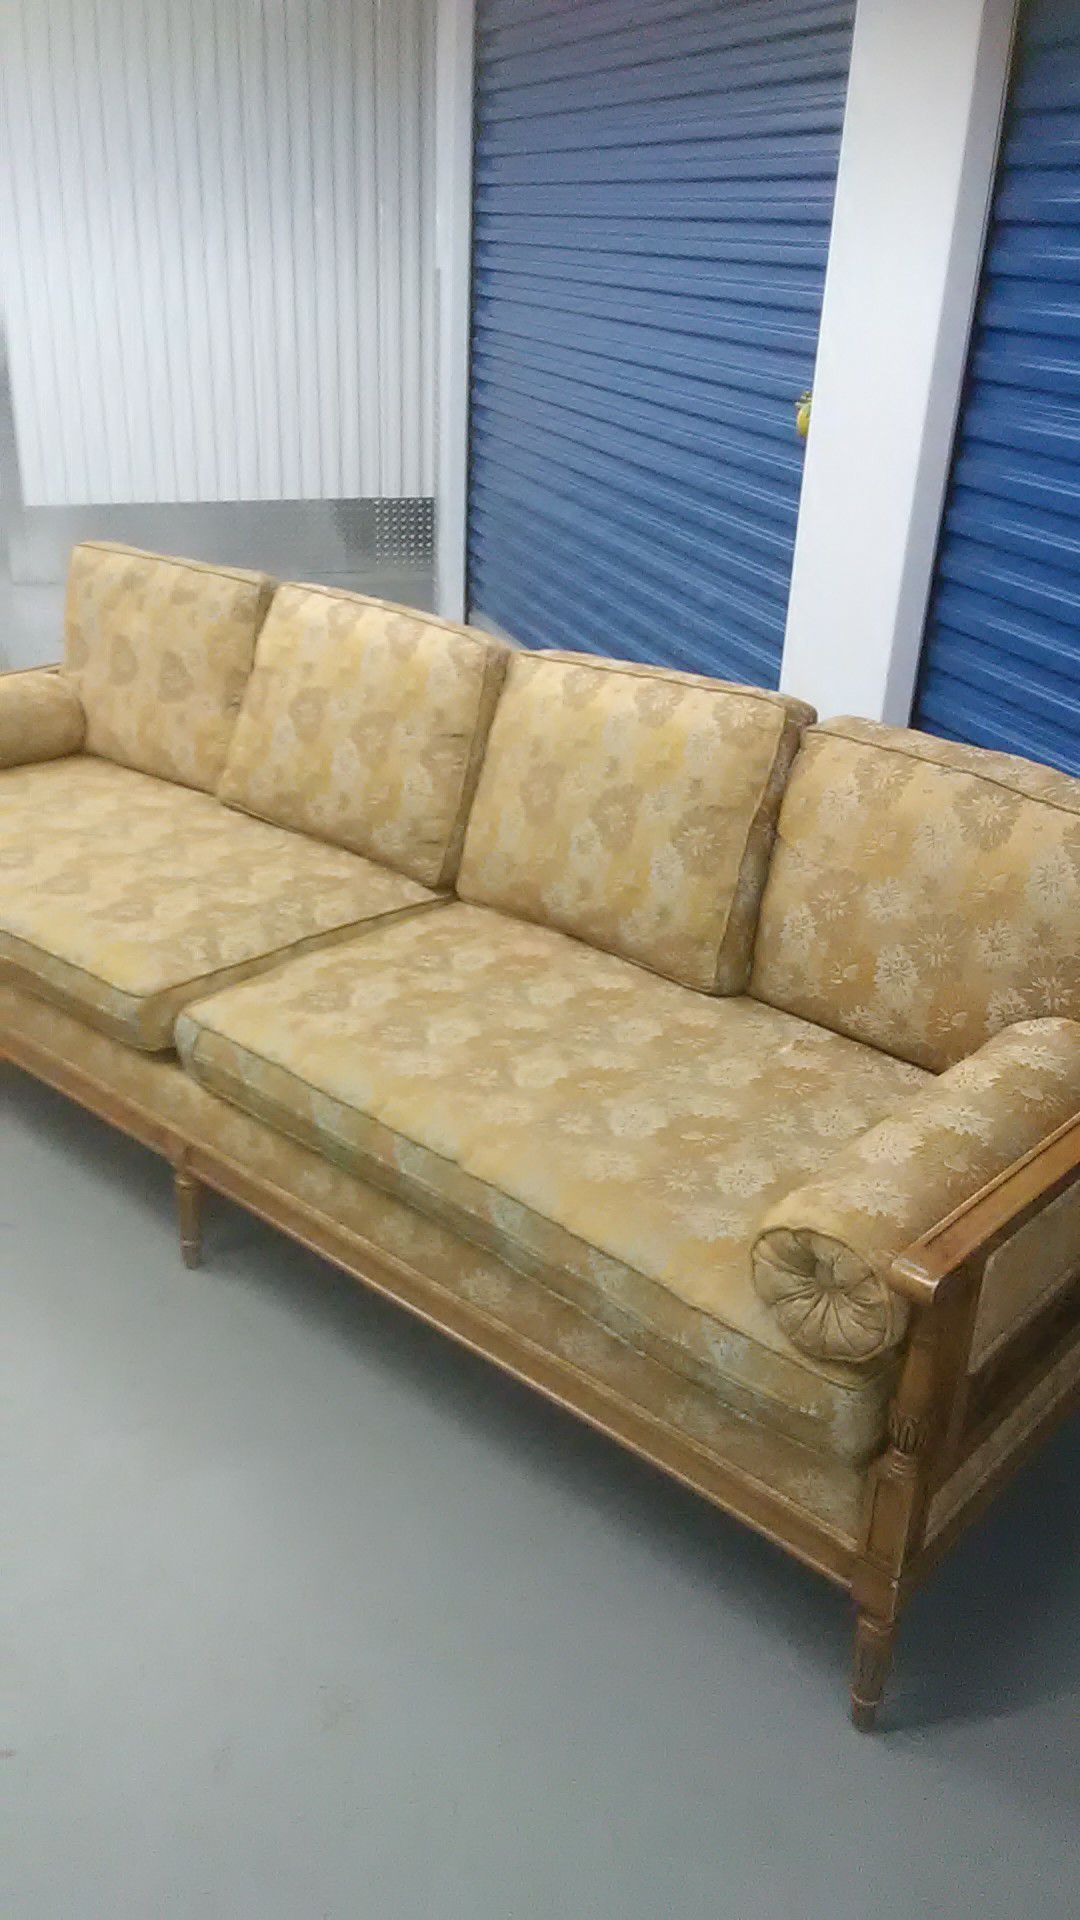 1960s 70s retro floral orange and yellow couch sofa